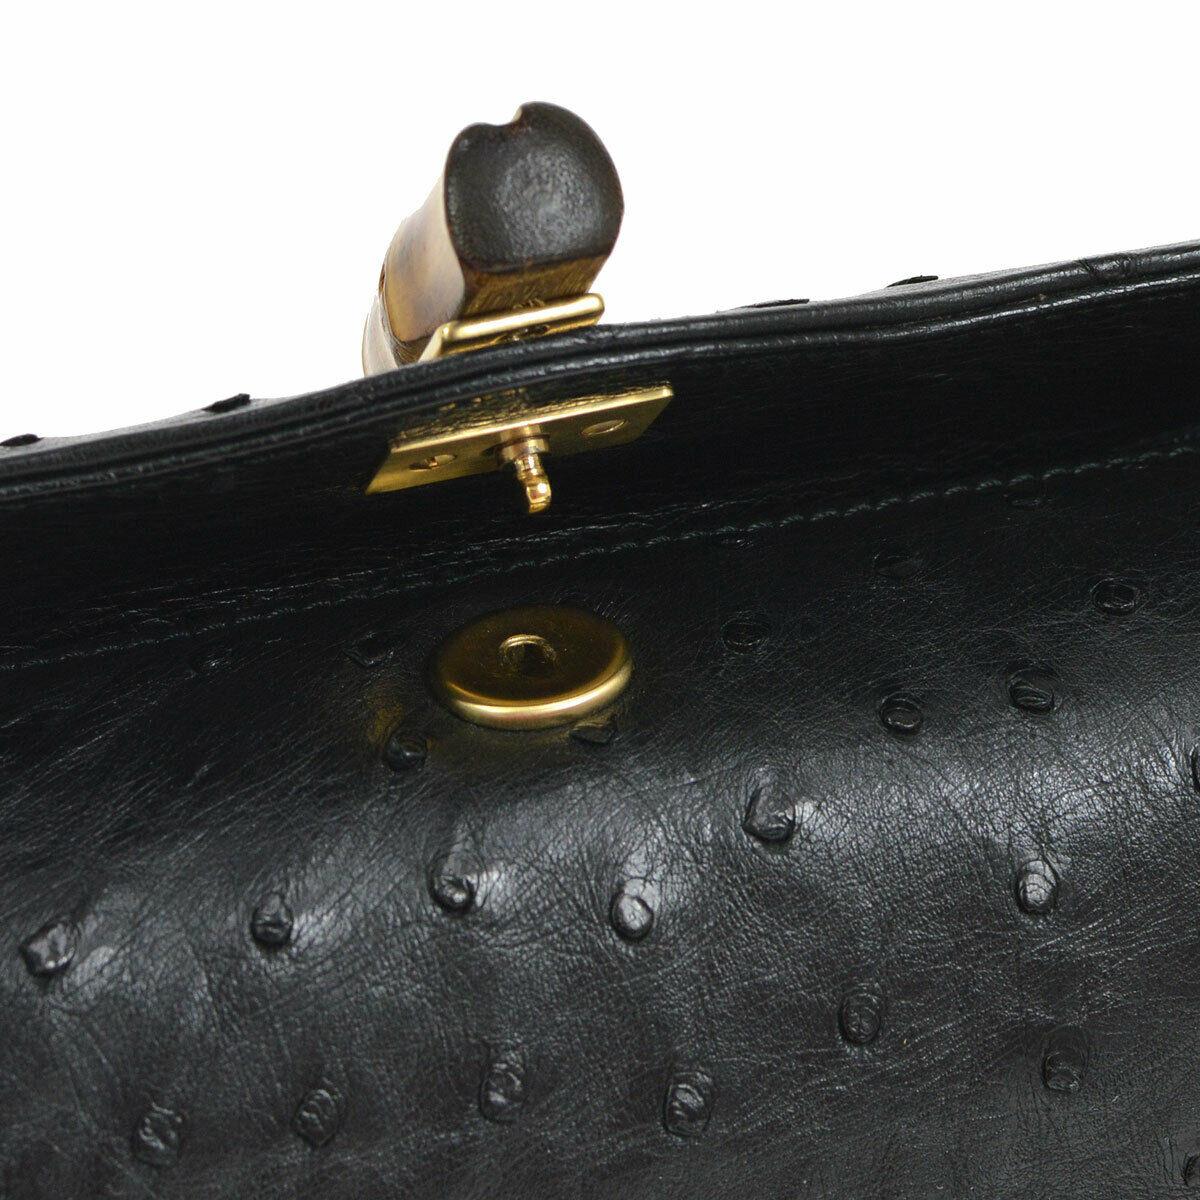 Gucci Black Ostrich Exotic Leather Mini Small Bamboo Kelly Style Top Handle Satchel  Evening Shoulder Bag  

Ostrich leather
Bamboo
Gold tone hardware
Made in Italy
Handle drop 6